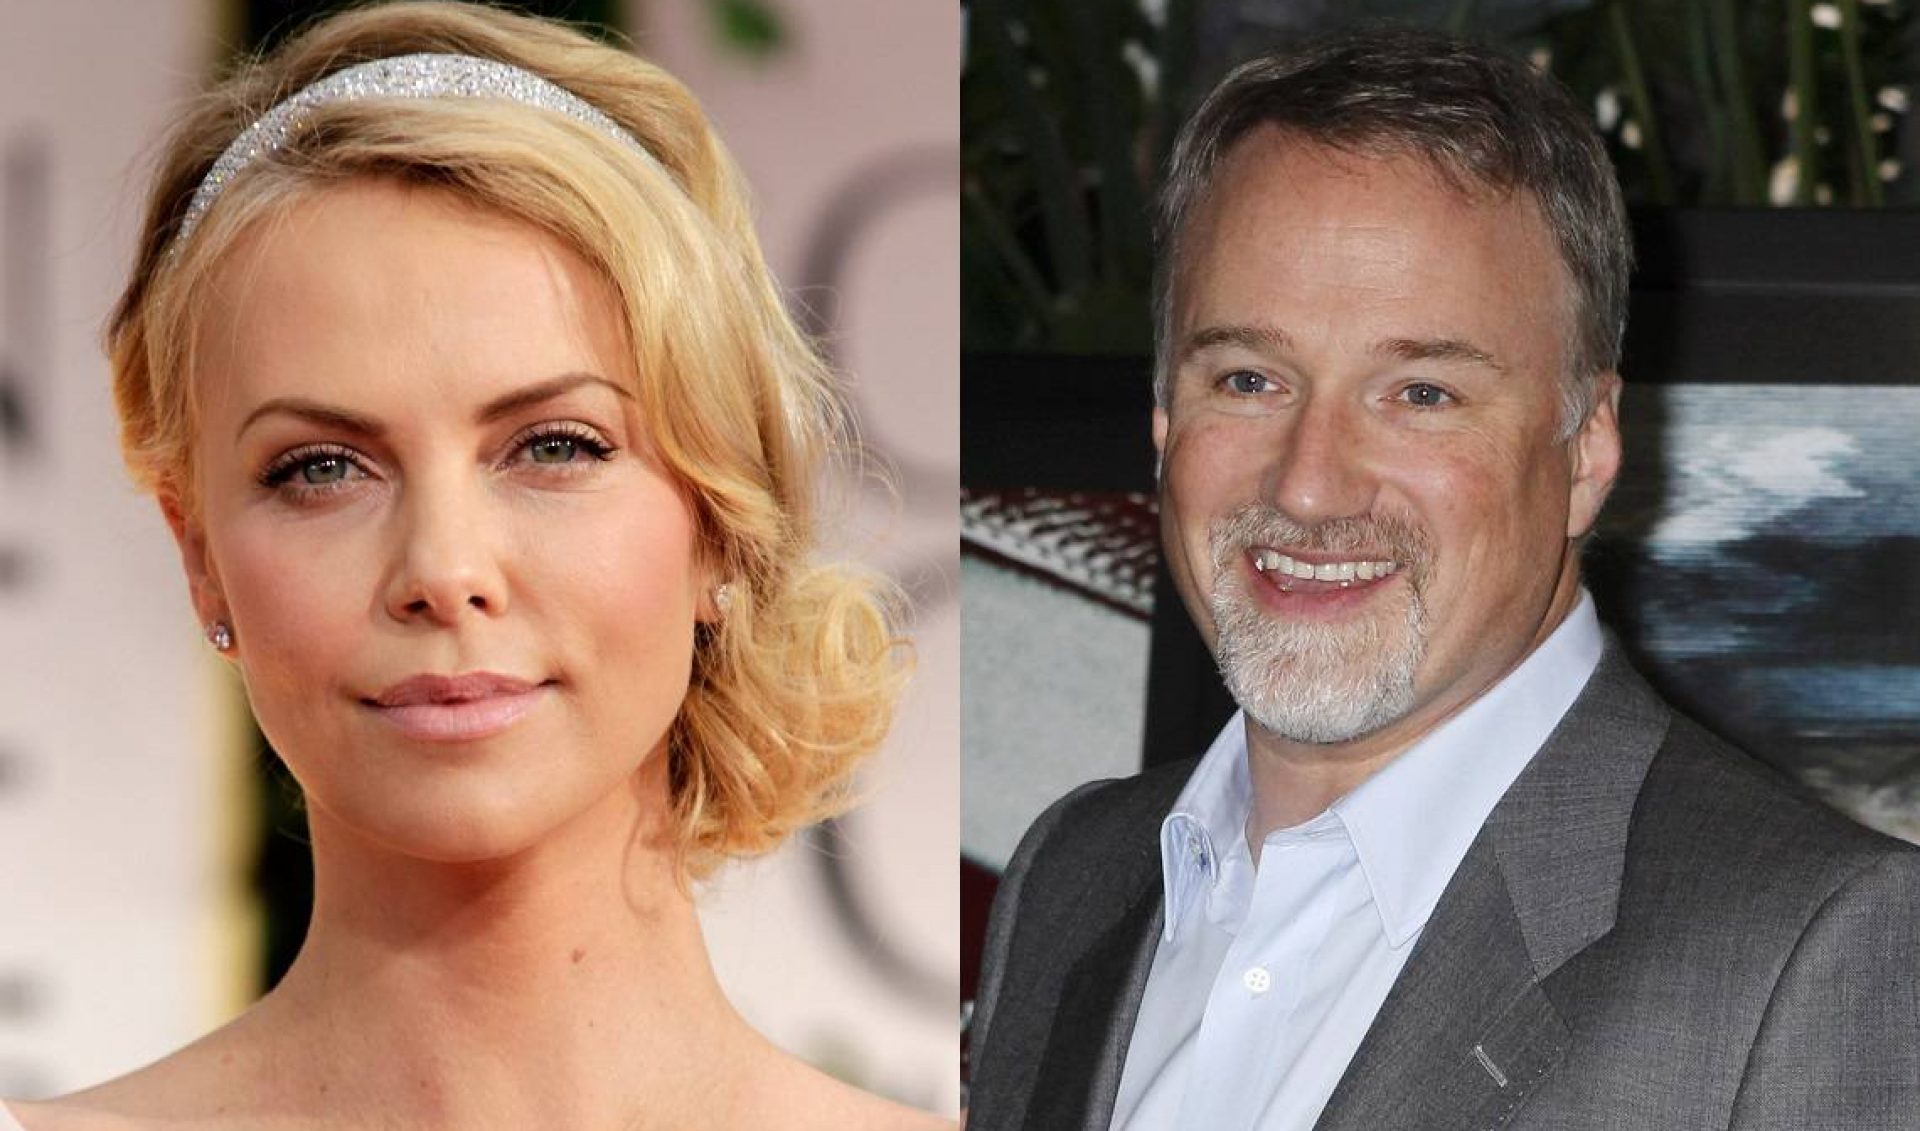 Netflix Reportedly Picks Up Serial Killer Drama From Charlize Theron, ‘House Of Cards’ Director